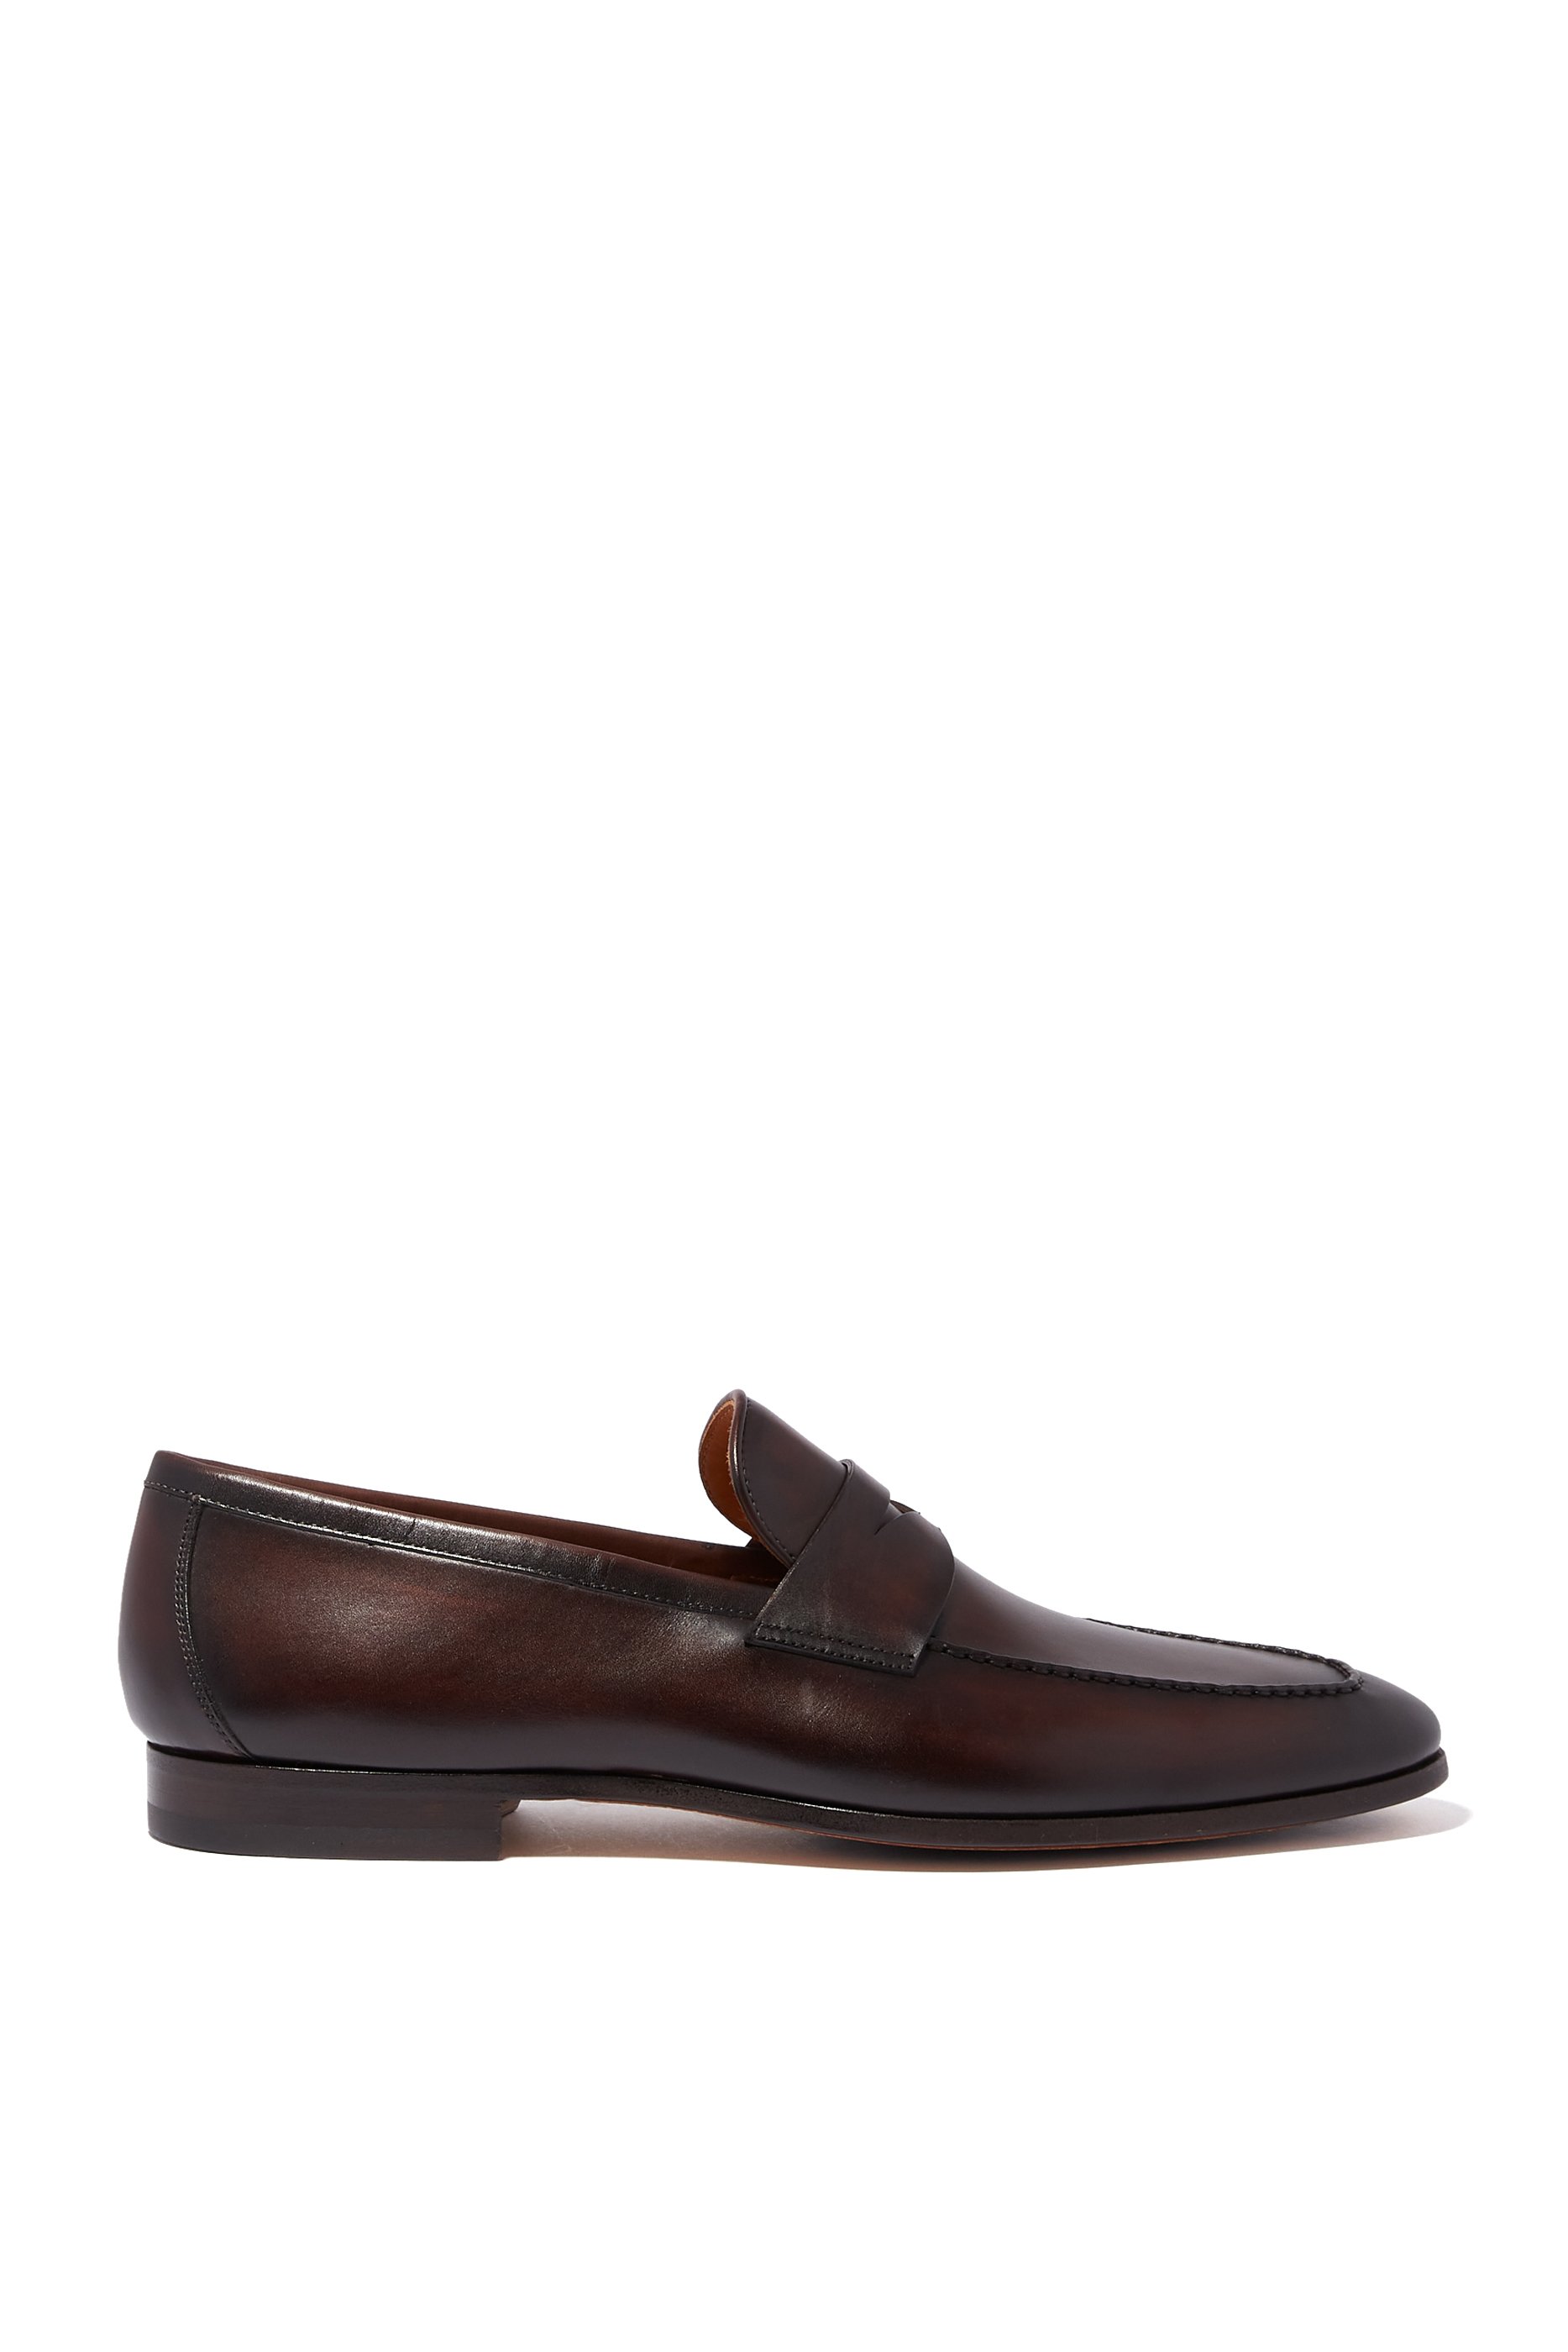 Buy Magnanni Classic Penny Loafers for Mens | Bloomingdale's UAE